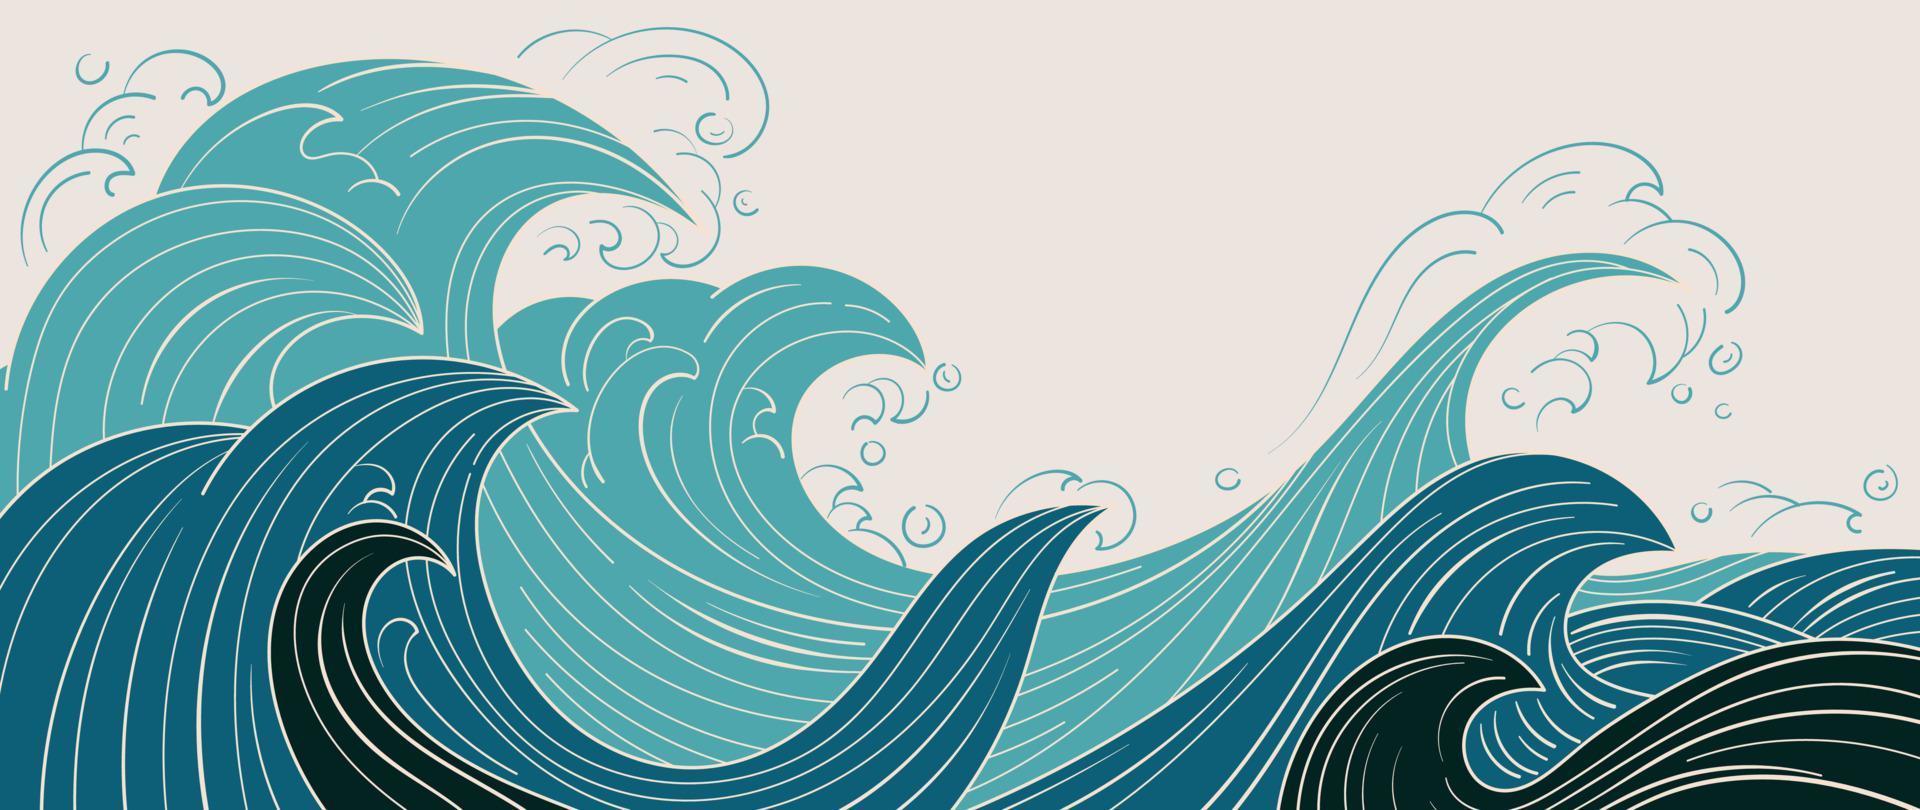 Traditional Japanese wave pattern vector. Luxury hand drawn oriental ocean wave splash line art pattern background. Art design illustration for print, fabric, poster, home decoration and wallpaper. vector